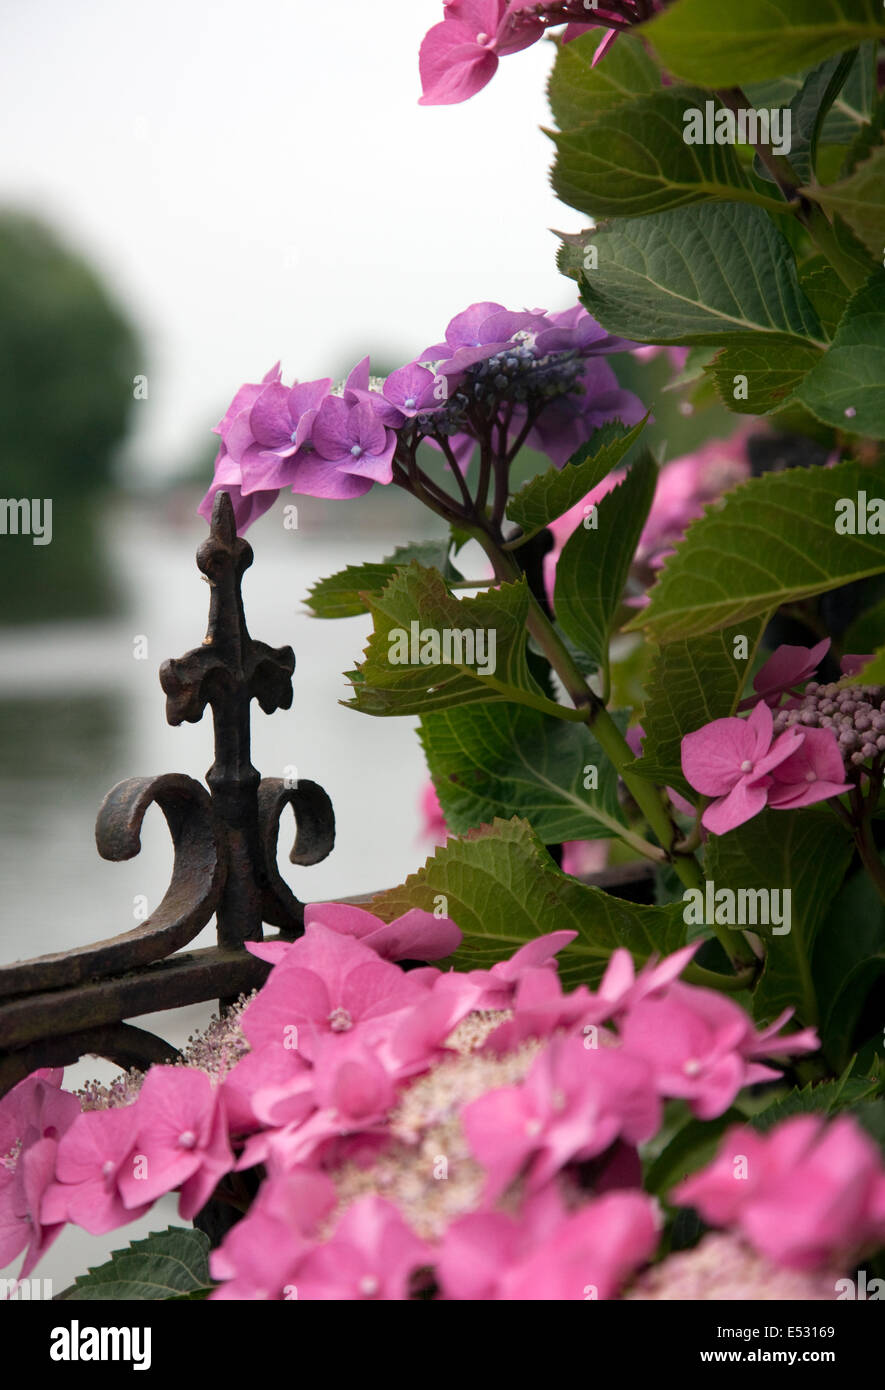 Hydrangeas in bloom with an old iron fence and river in the background Stock Photo